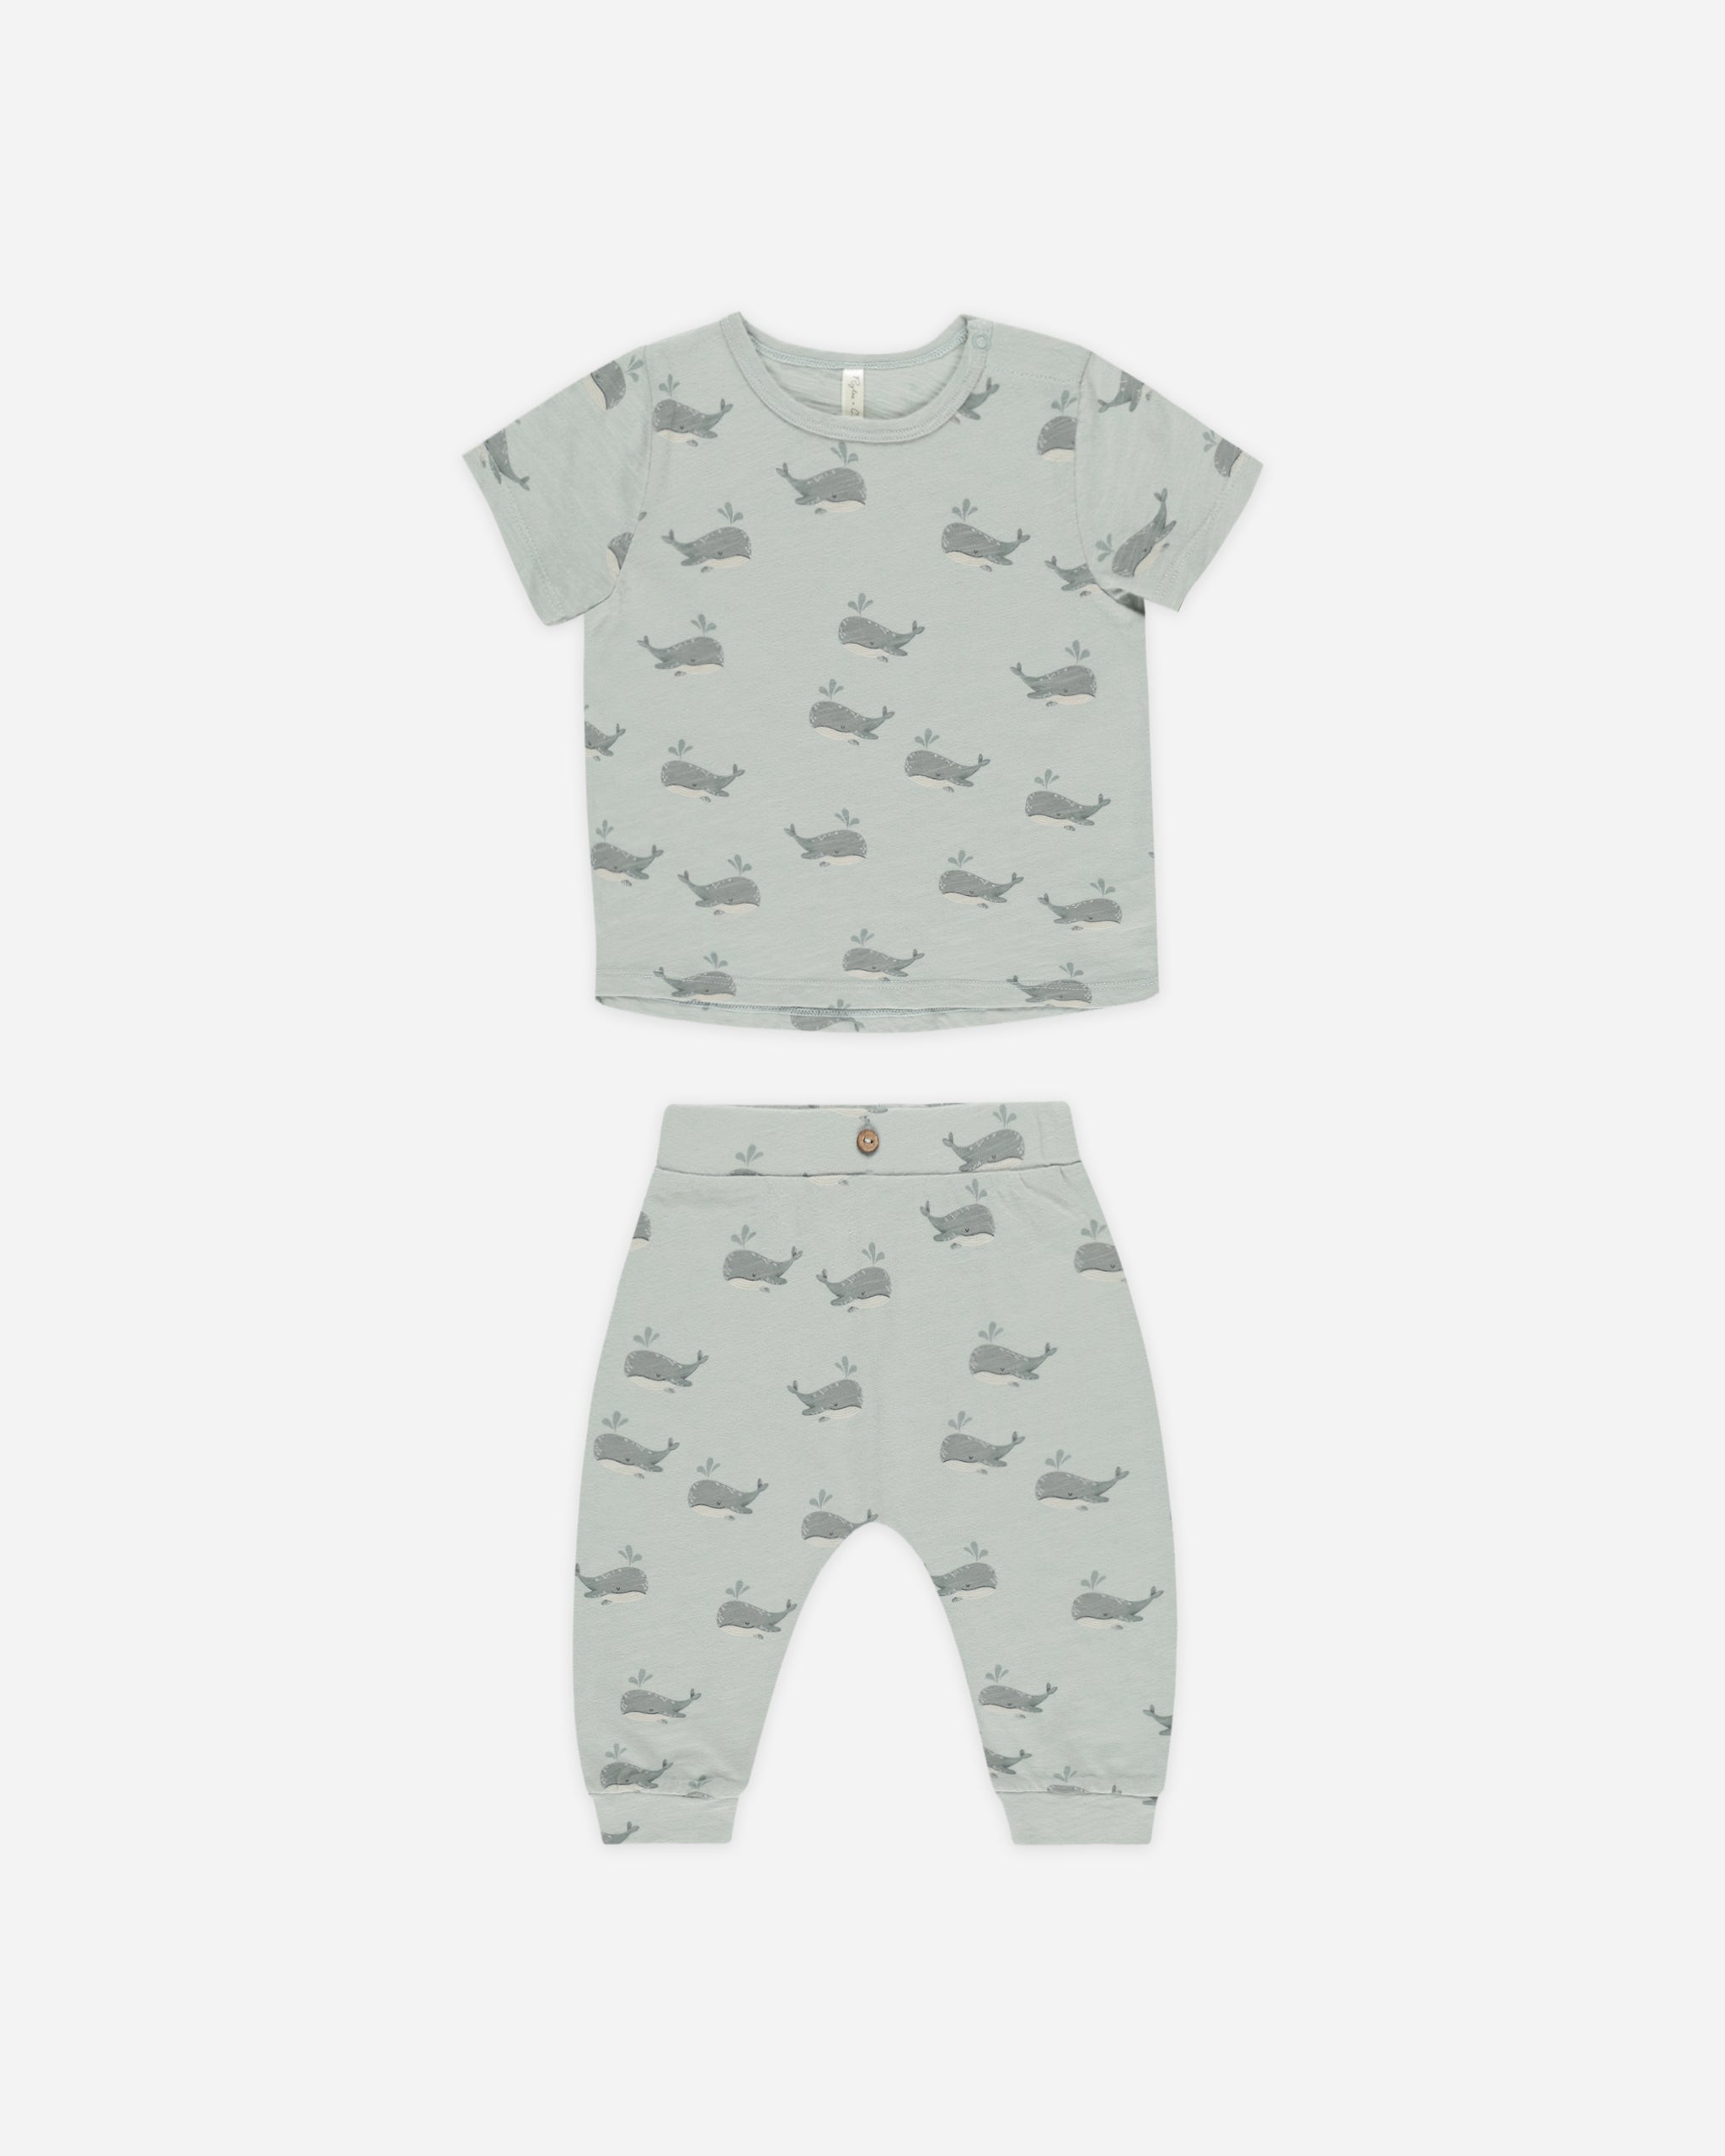 Tee + Slouch Pant Set || Whales - Rylee + Cru | Kids Clothes | Trendy Baby Clothes | Modern Infant Outfits |